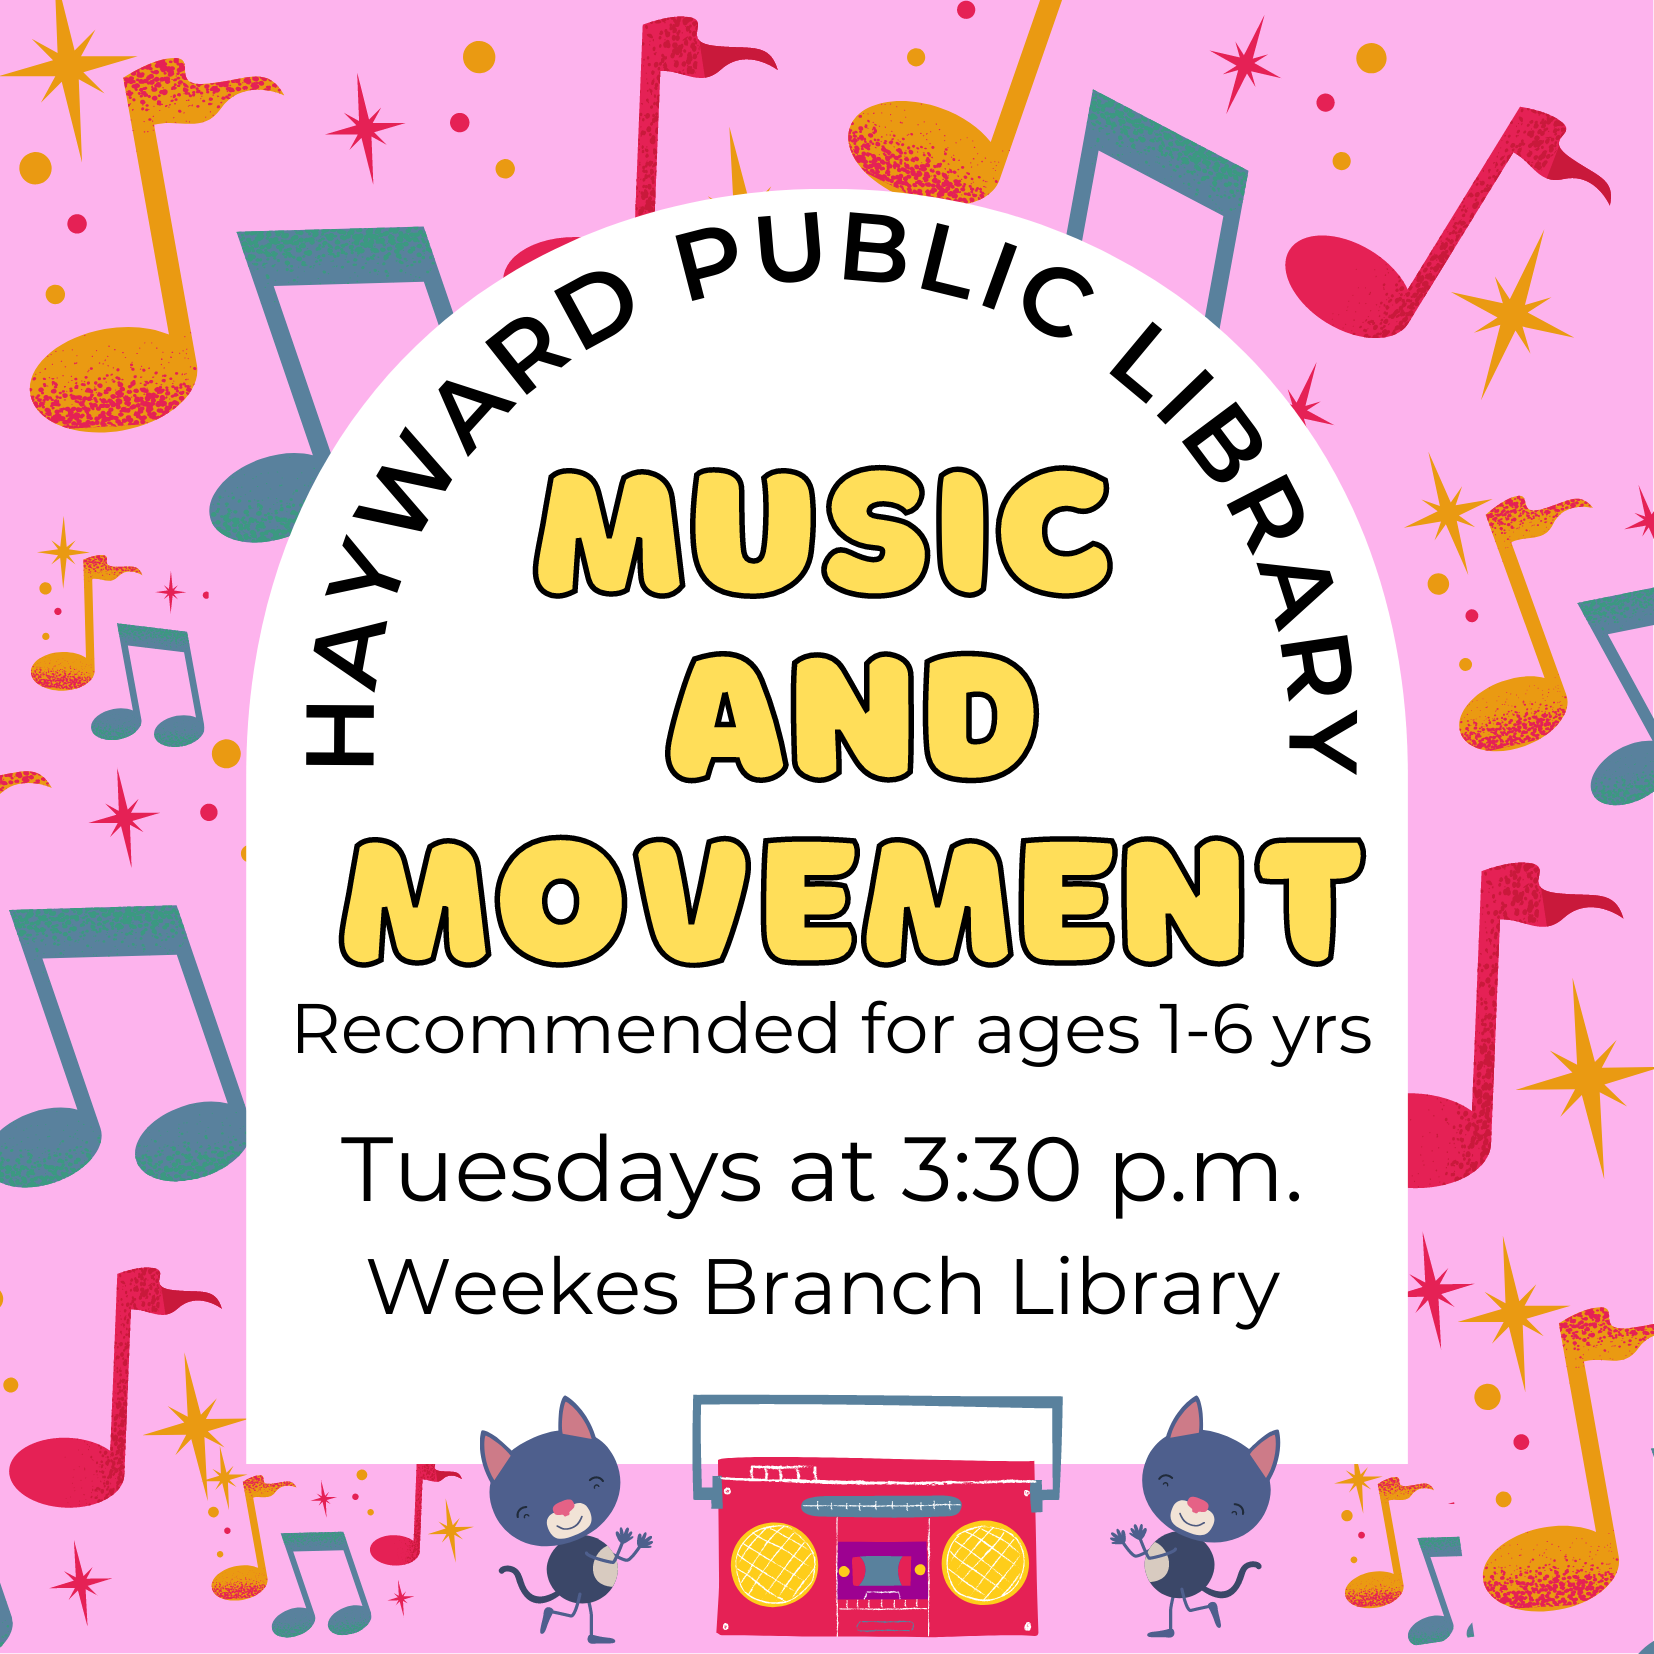 light pink flyer with orange, blue, hot pink musical notes. White box with black and yellow text. 2 cats dancing next to a pink radio at bottom of flyer. Text reads: Hayward Public Library, Music and Movement, recommended for ages 1-6yrs, Tuesdays at 3:30 pm, Weekes Branch